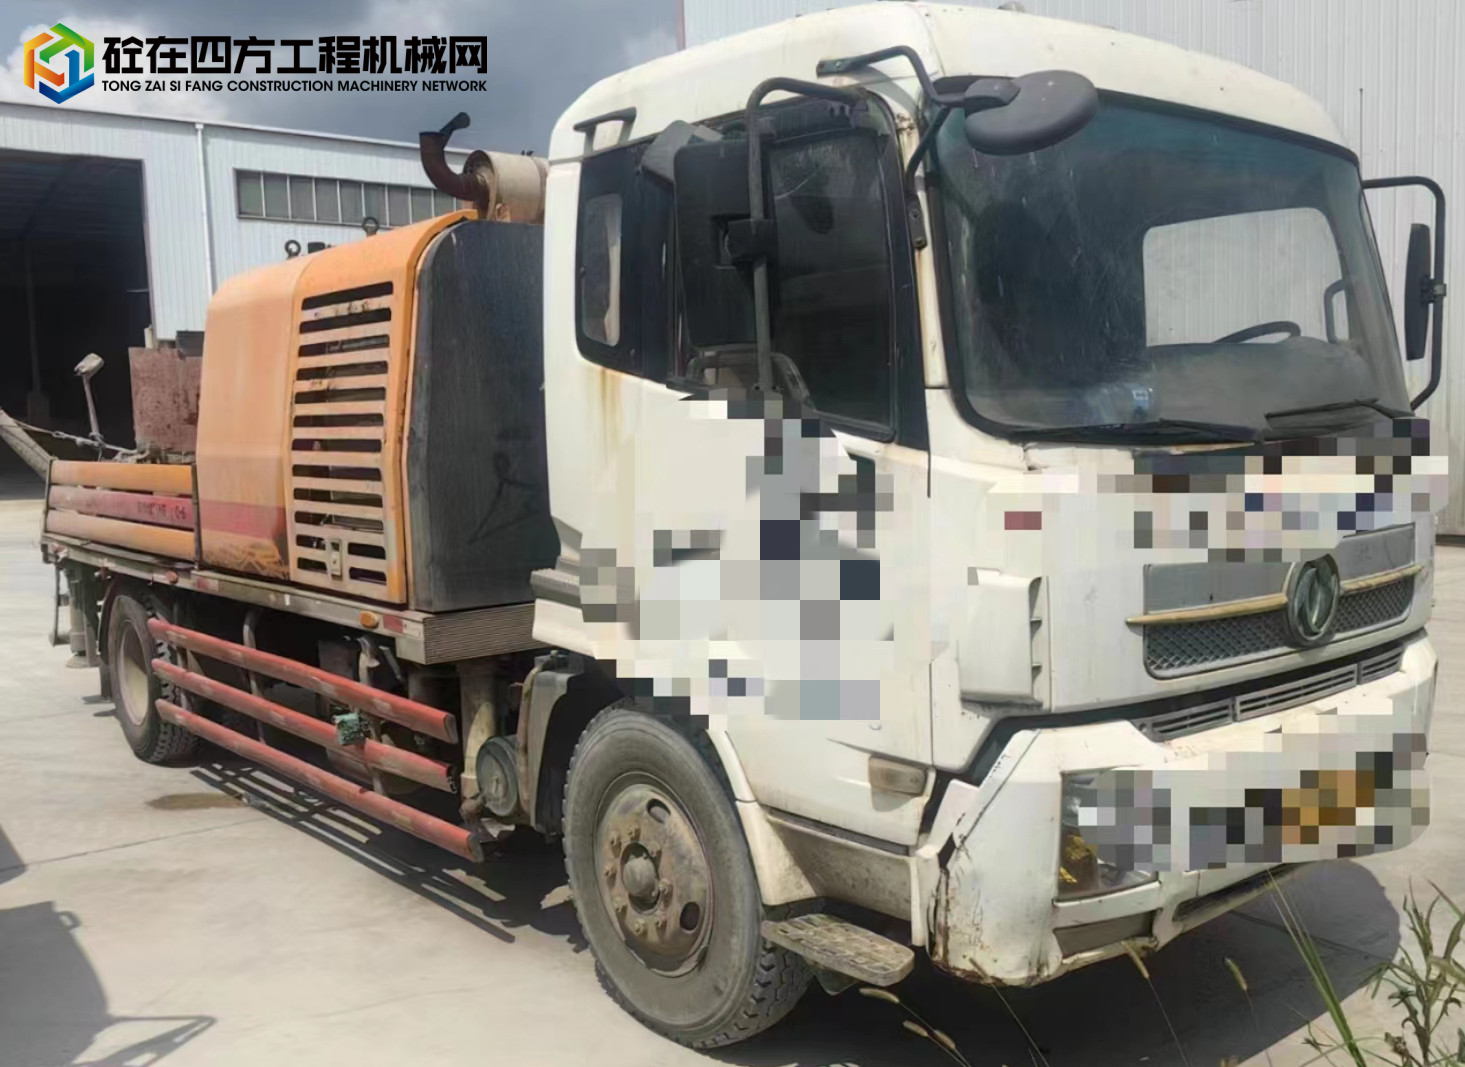 https://images.tongzsf.com/tong/truck_machine/20230912/1650029be17af4.jpg